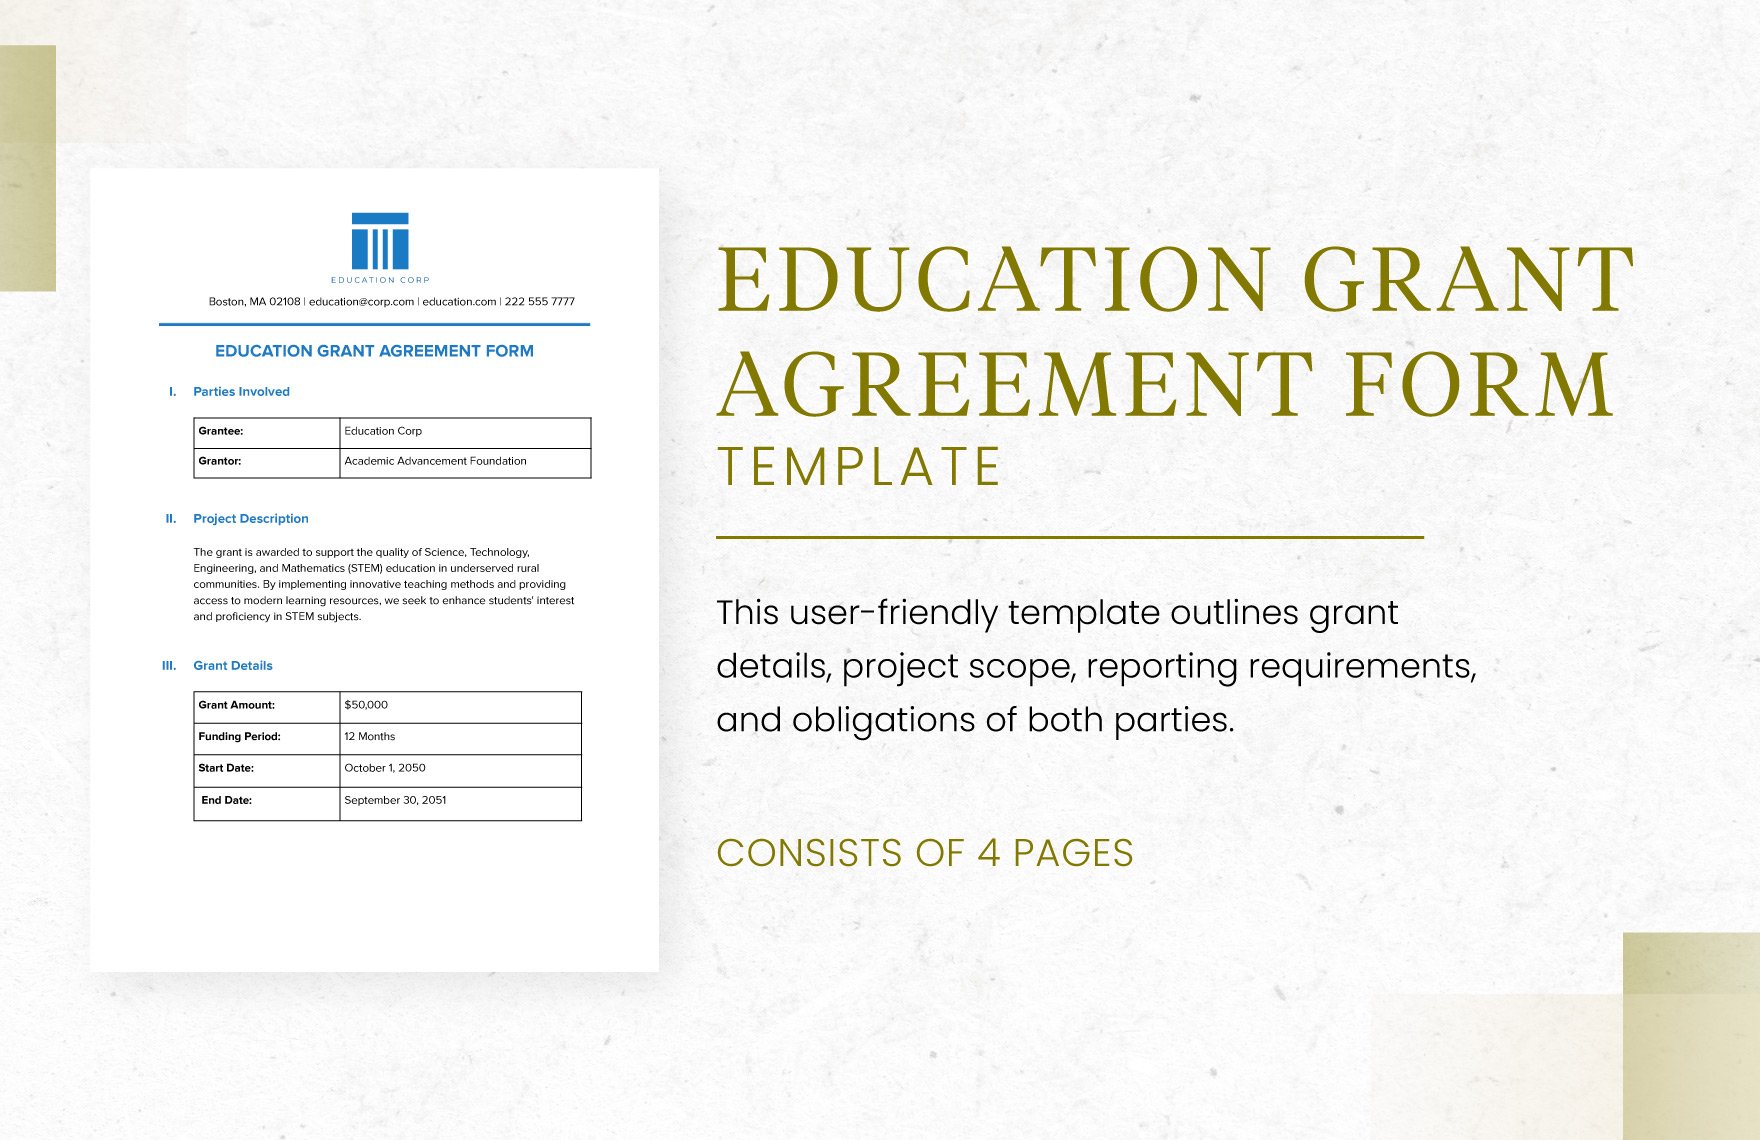 Education Grant Agreement Form Template in Word, Google Docs, PDF